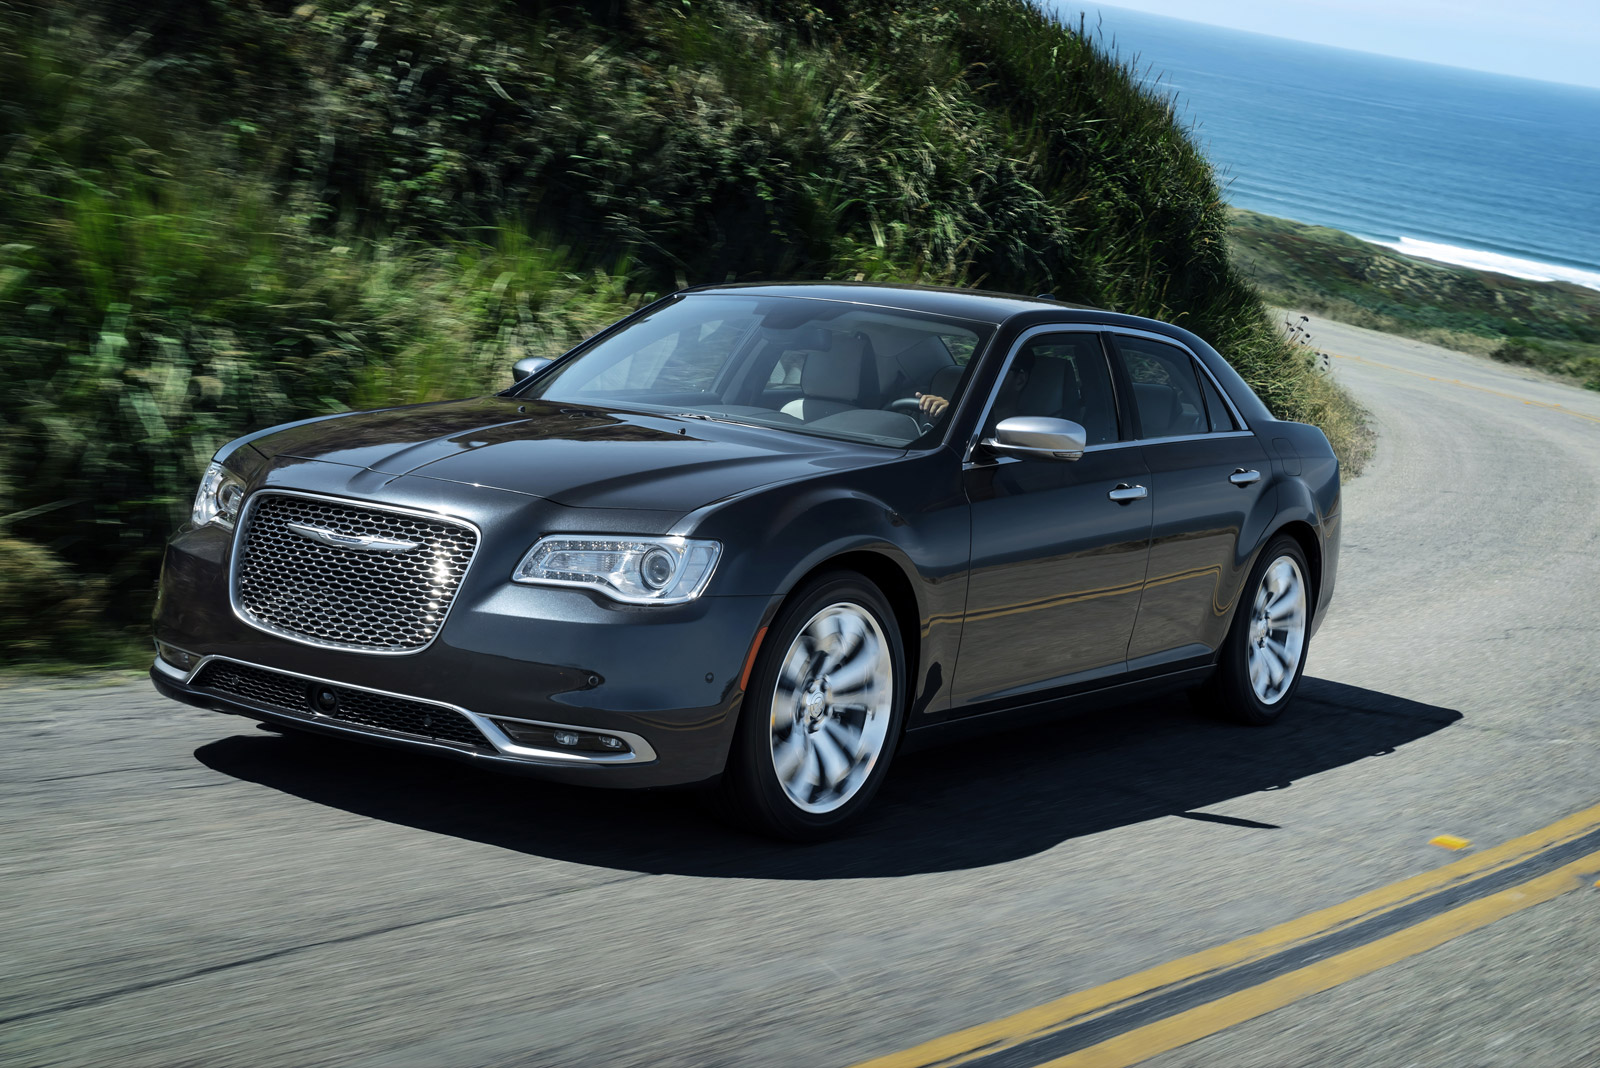 2015 Chrysler 300 Review Ratings Specs Prices And Photos